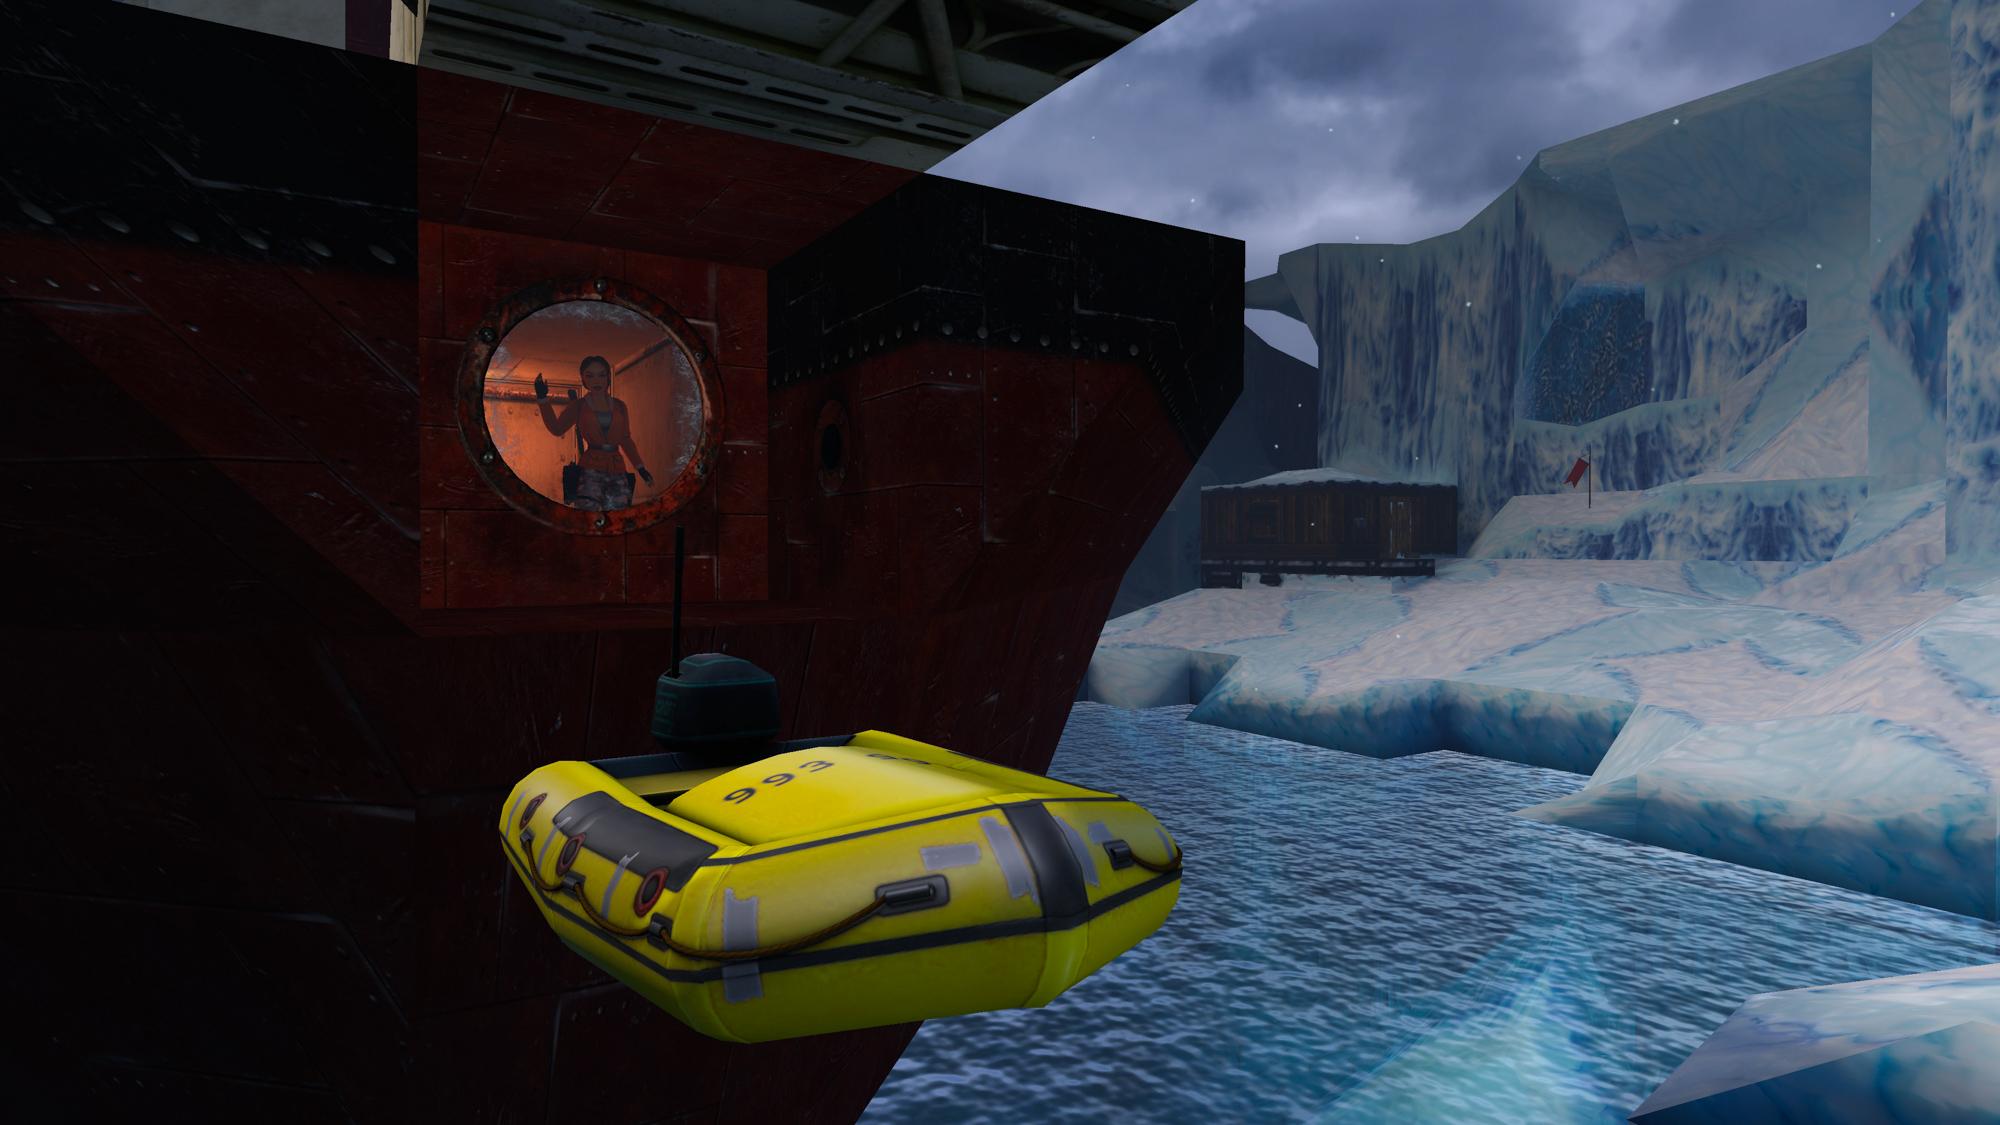 Lara undocking the dinghy from the RX EXPLORER ship in Antarctica.